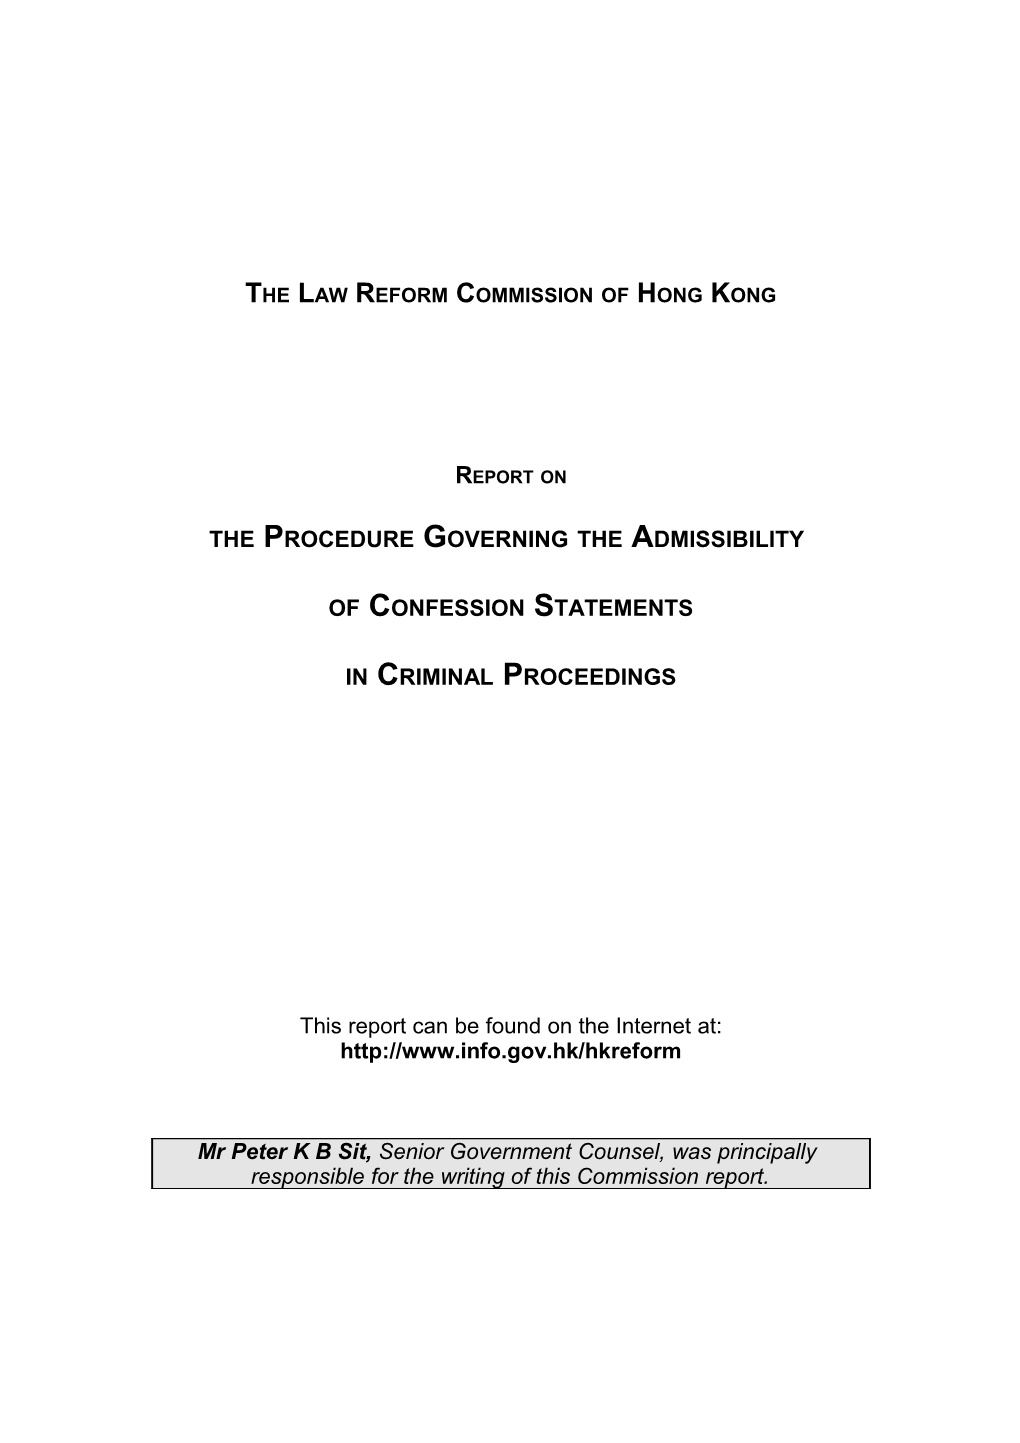 The Law Reform Commission of Hong Kong s1